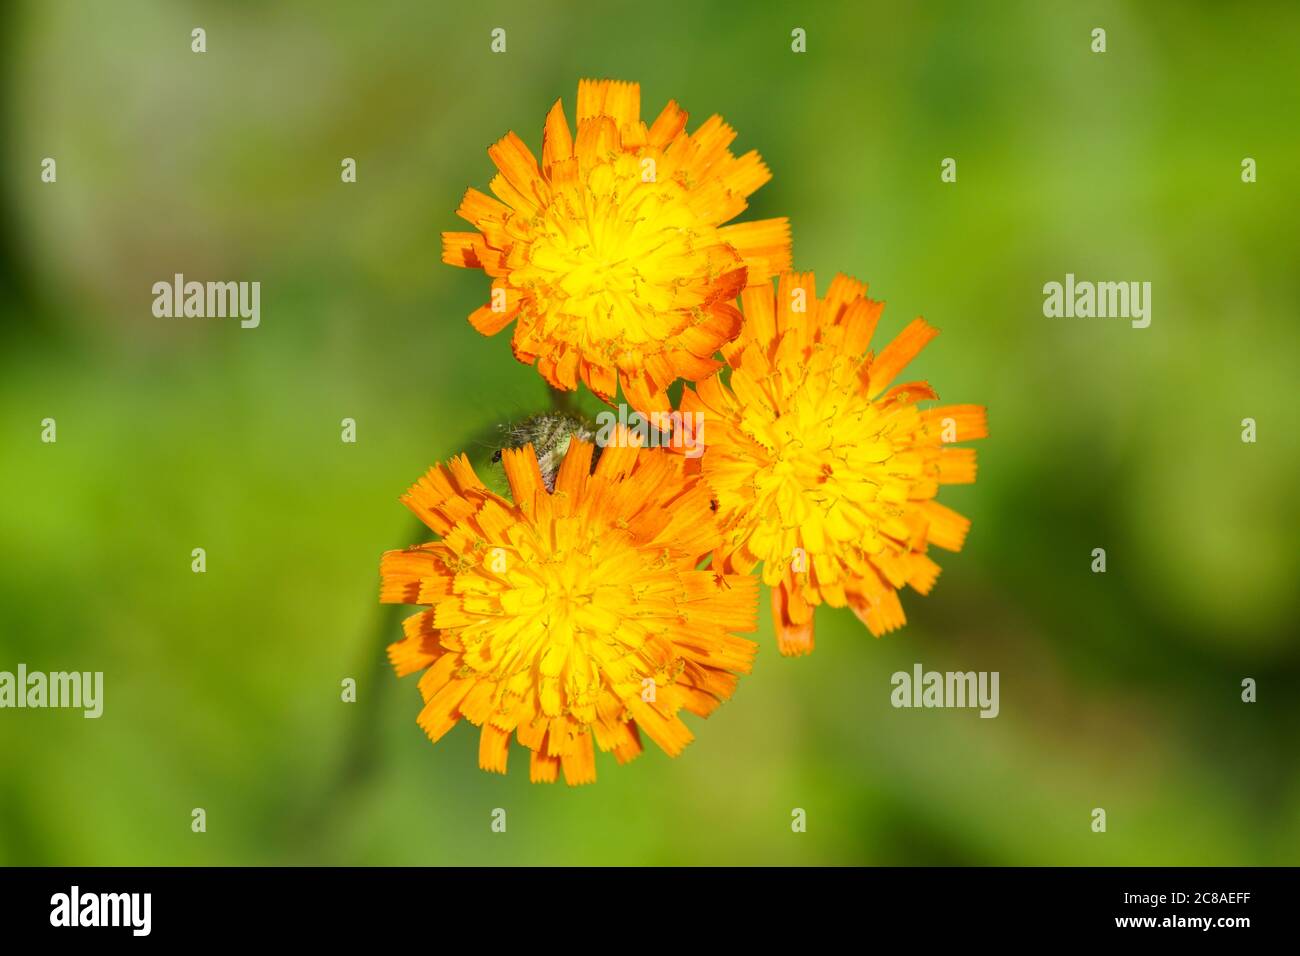 Orange hawkweed (Pilosella aurantiaca) also known as fox-and-cubs, an orange wild flower native to central and southern Europe. Similar to dandelion. Stock Photo